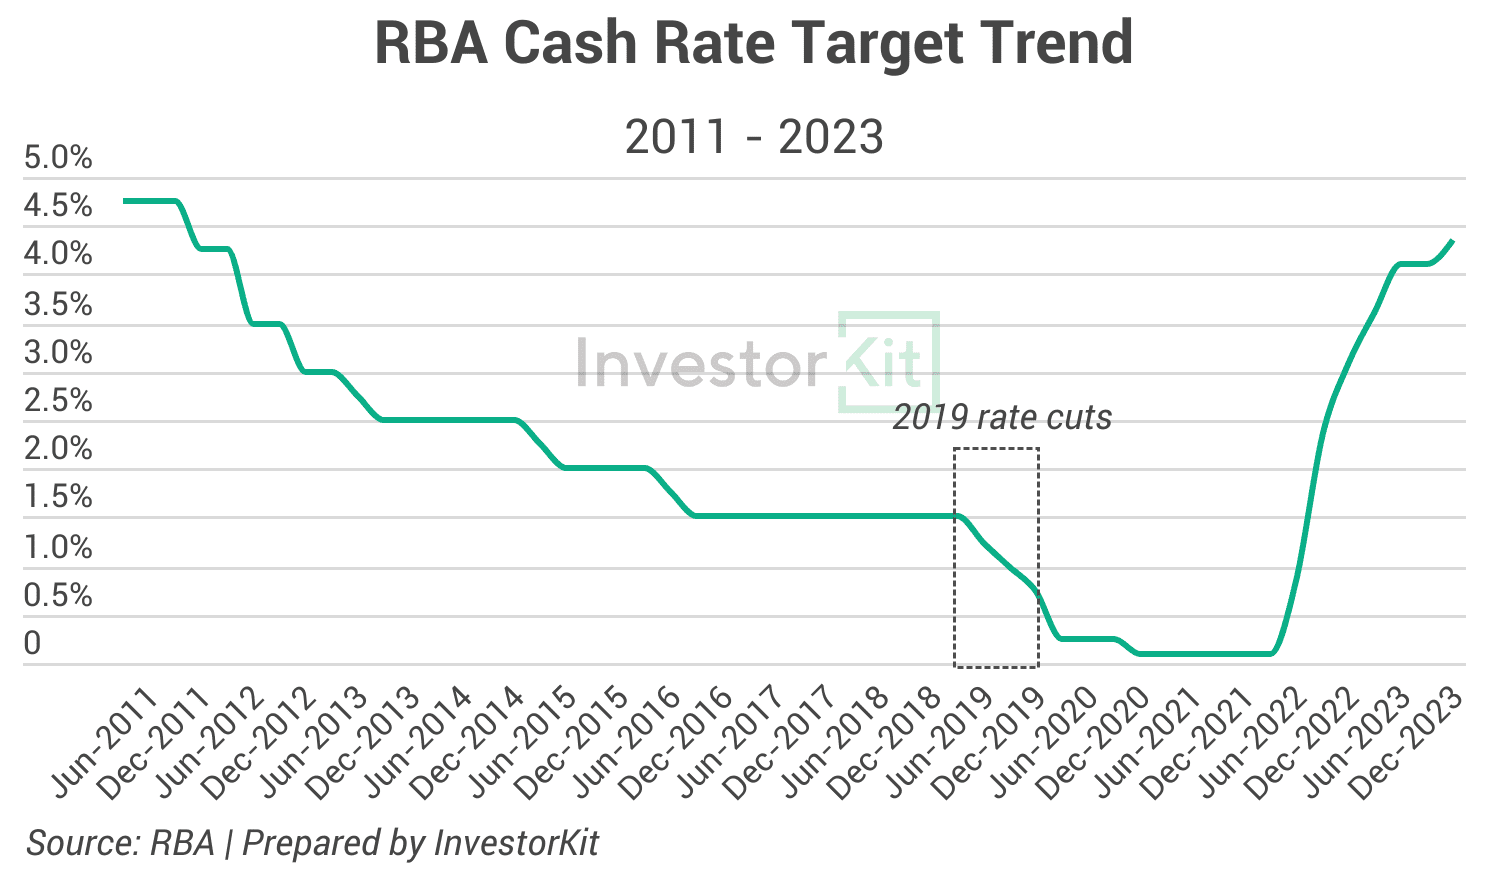 Image of Cash rate trend